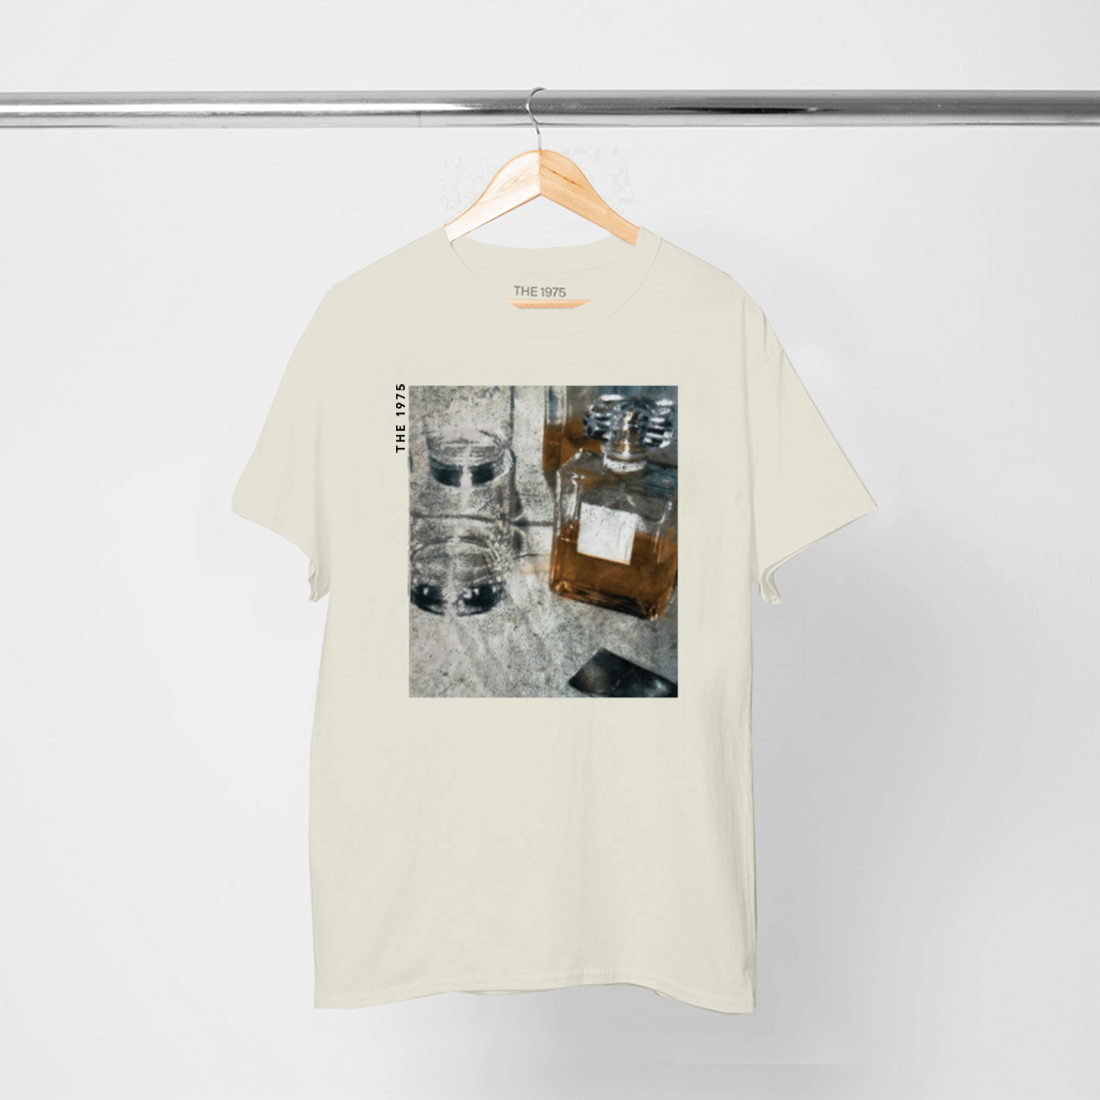 The 1975 - Decanter T-Shirt